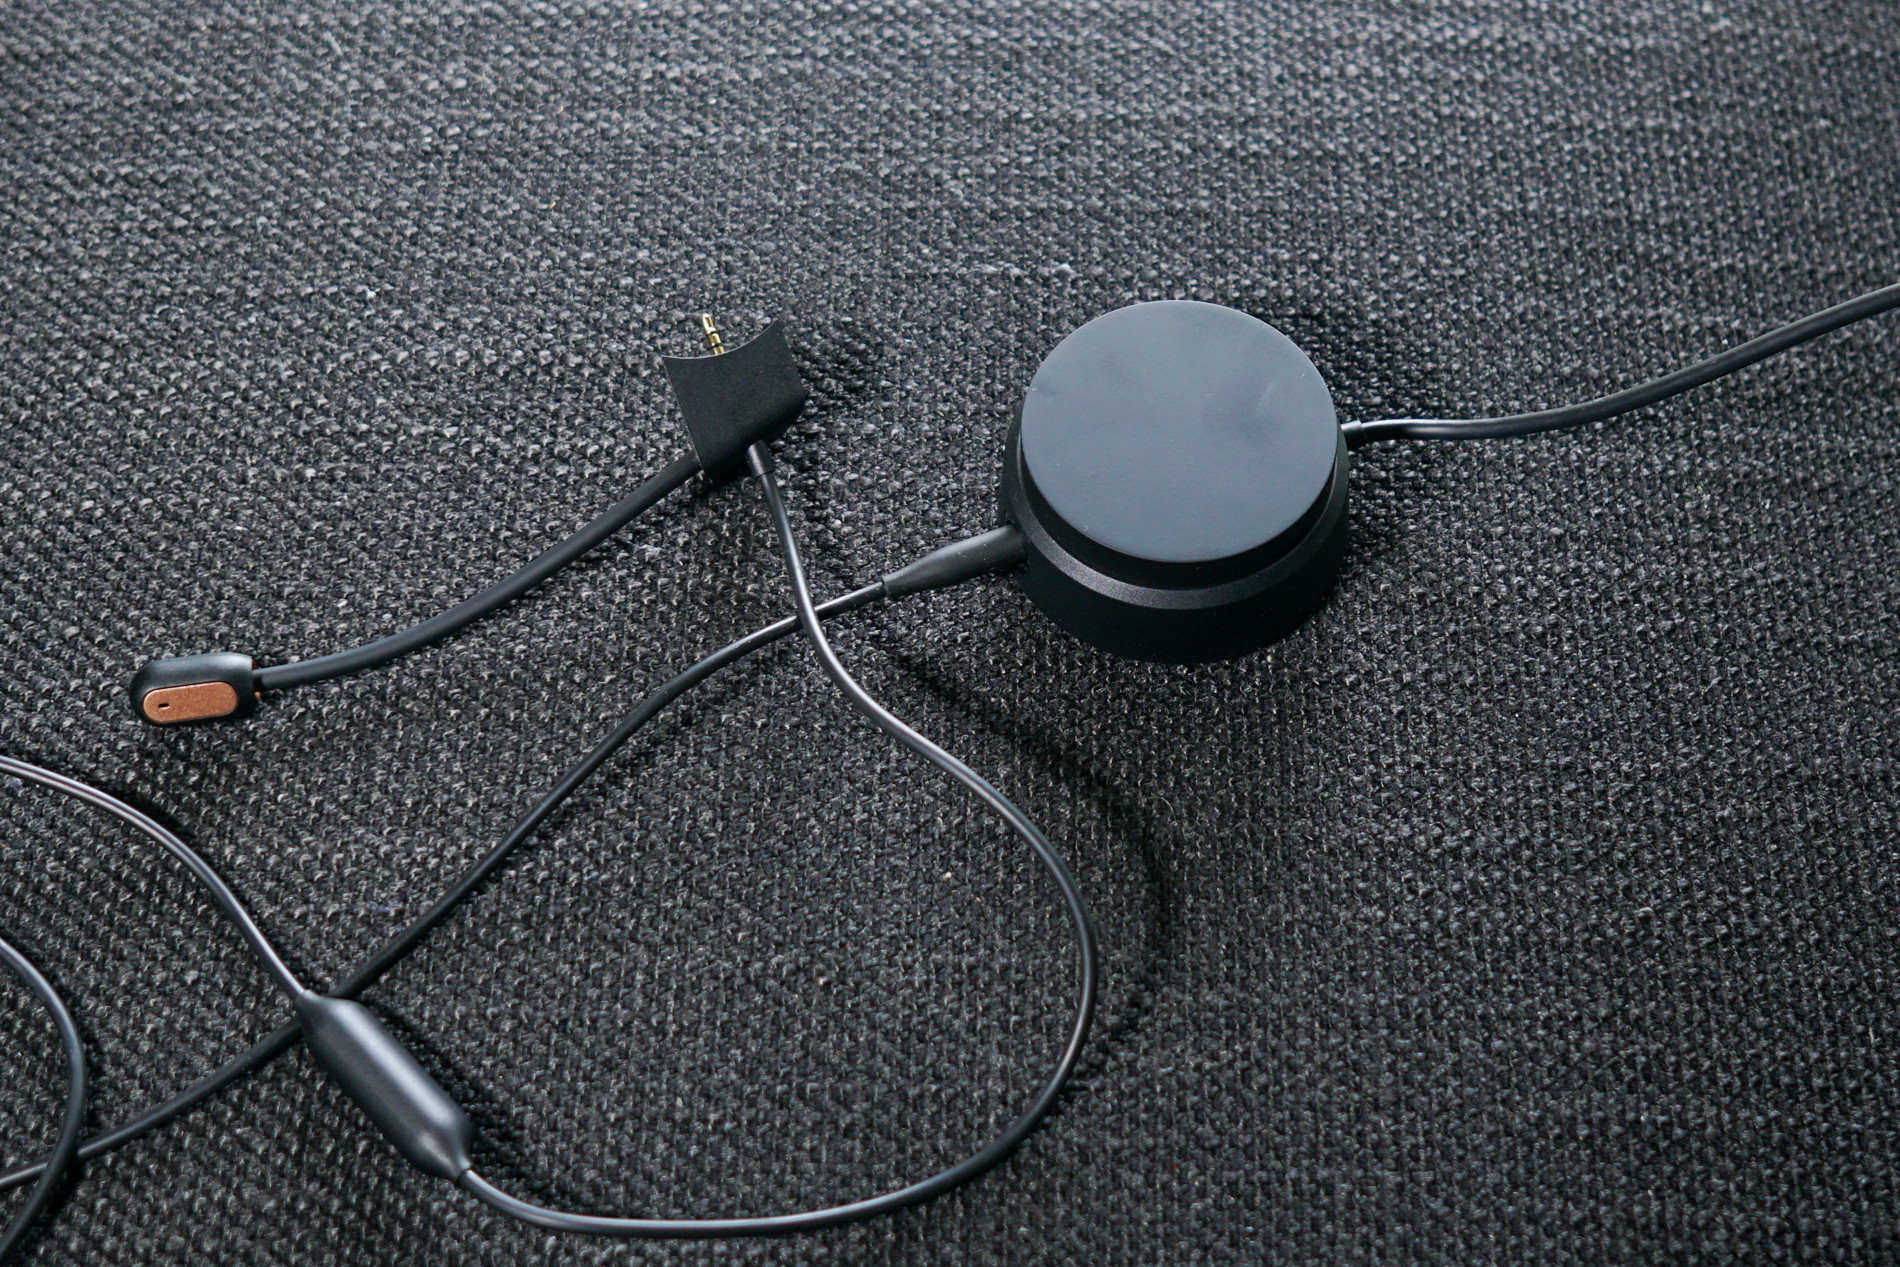 The detachable microphone and volume dial for the Bose QuietComfort 35 II gaming headset sit together on a fabric surface.